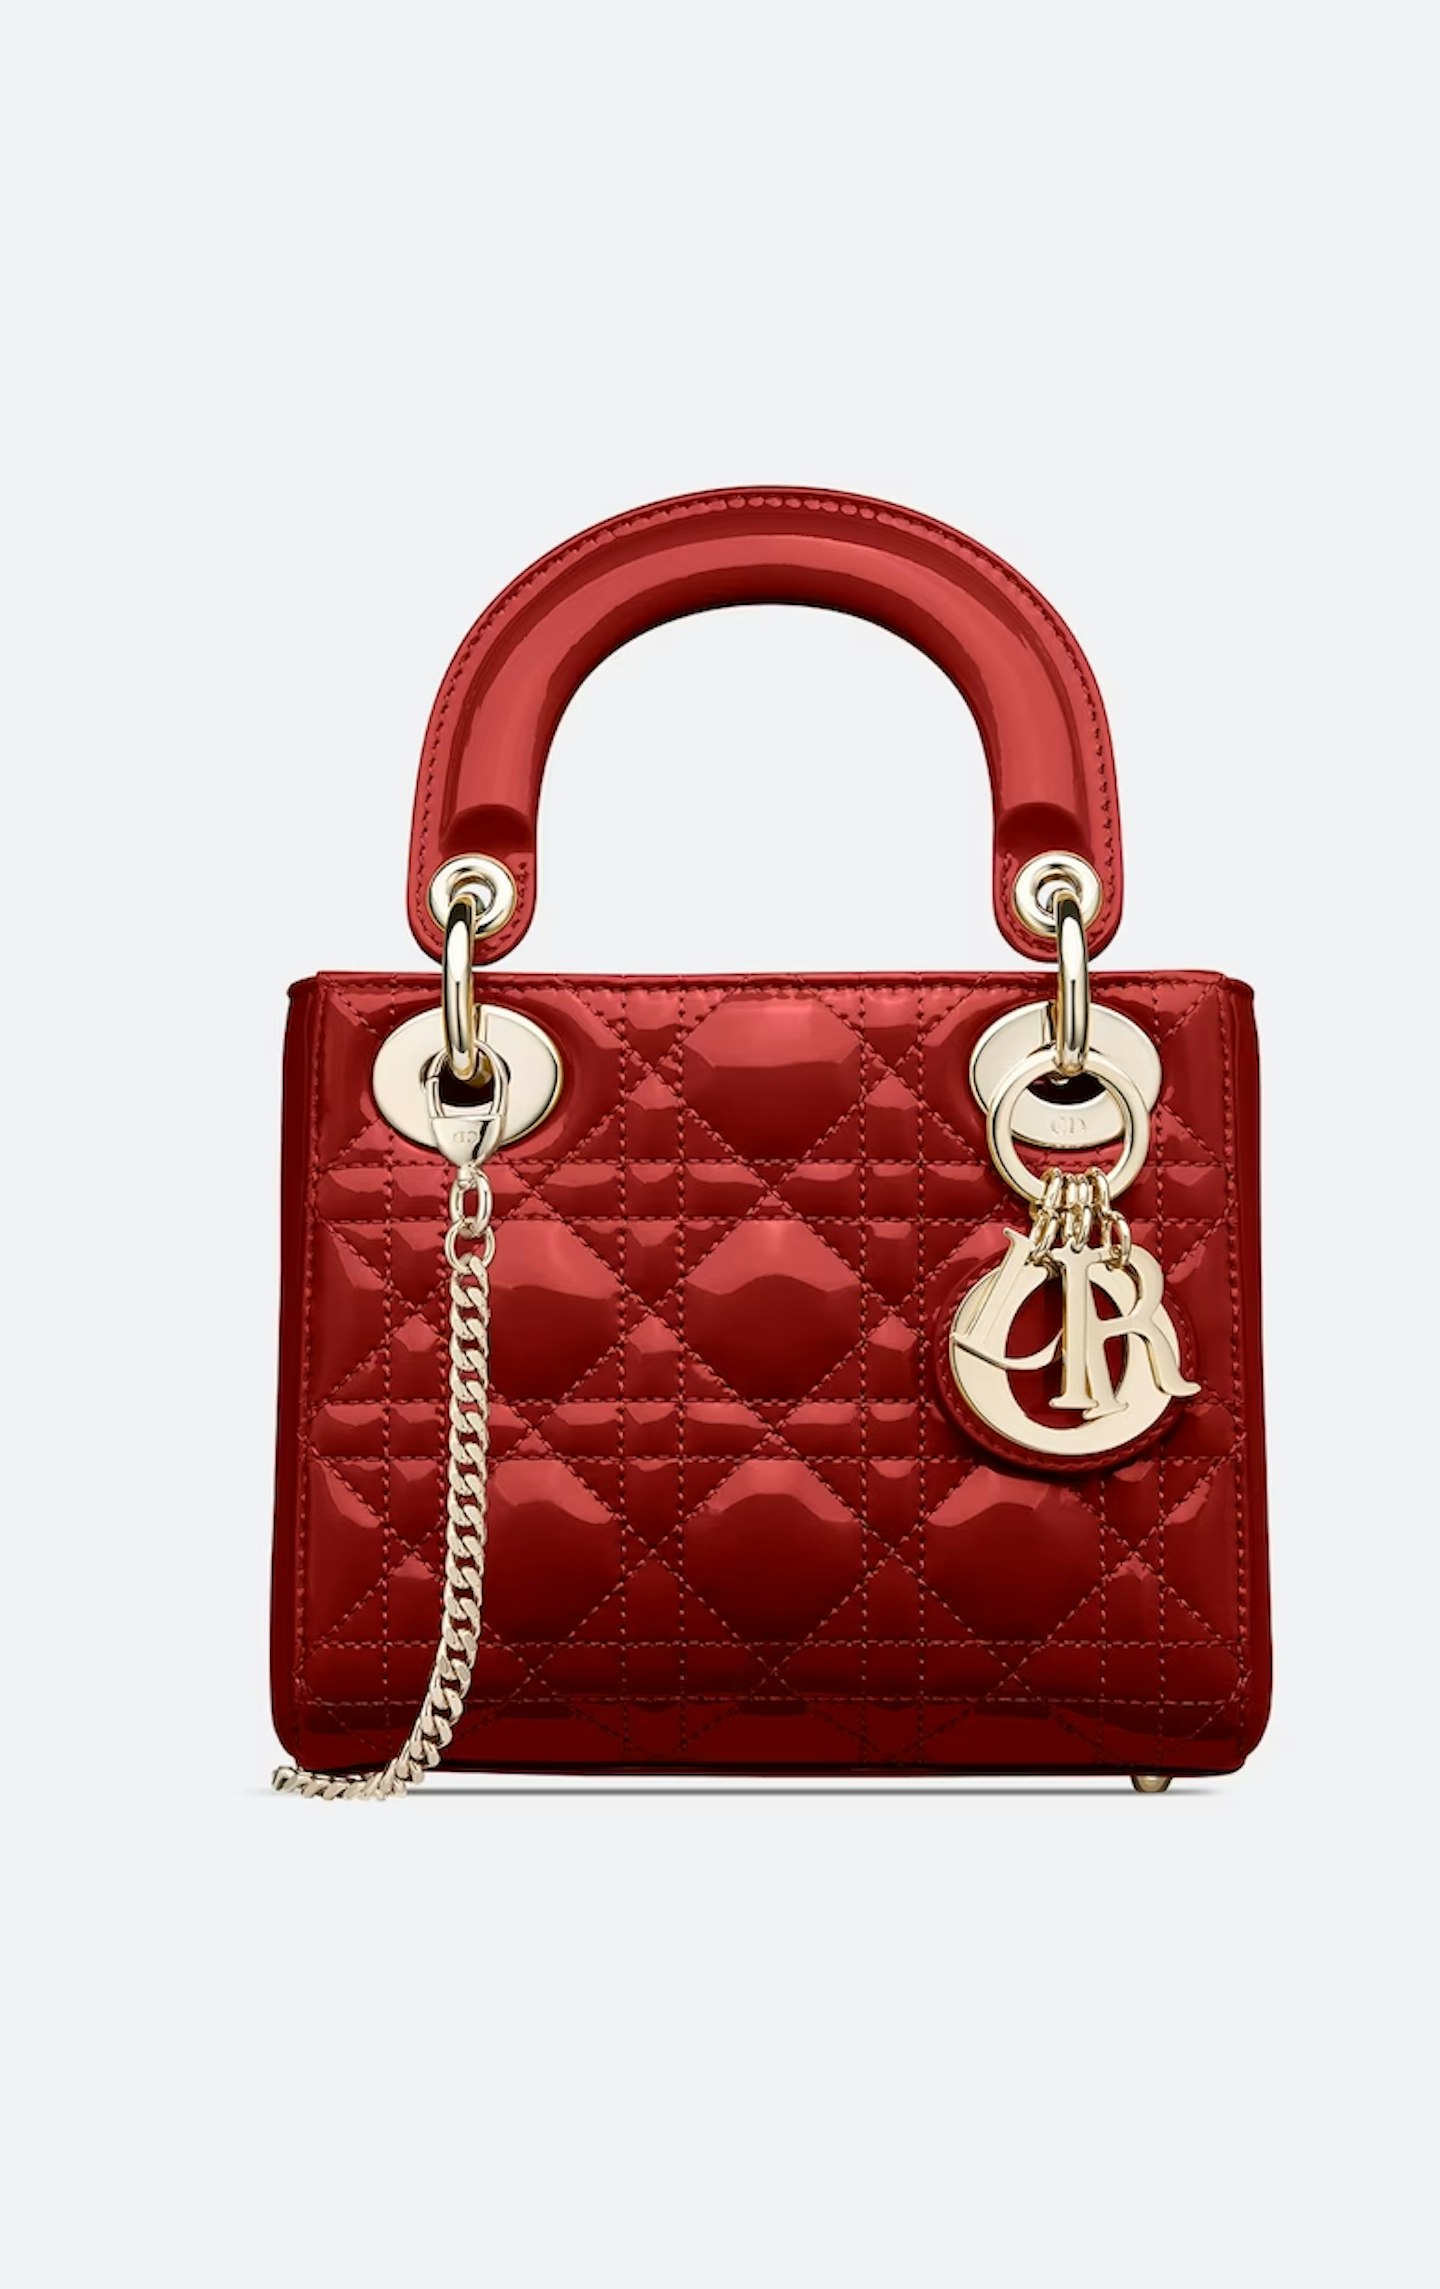 10 most popular Dior bags worth the investment in 2023